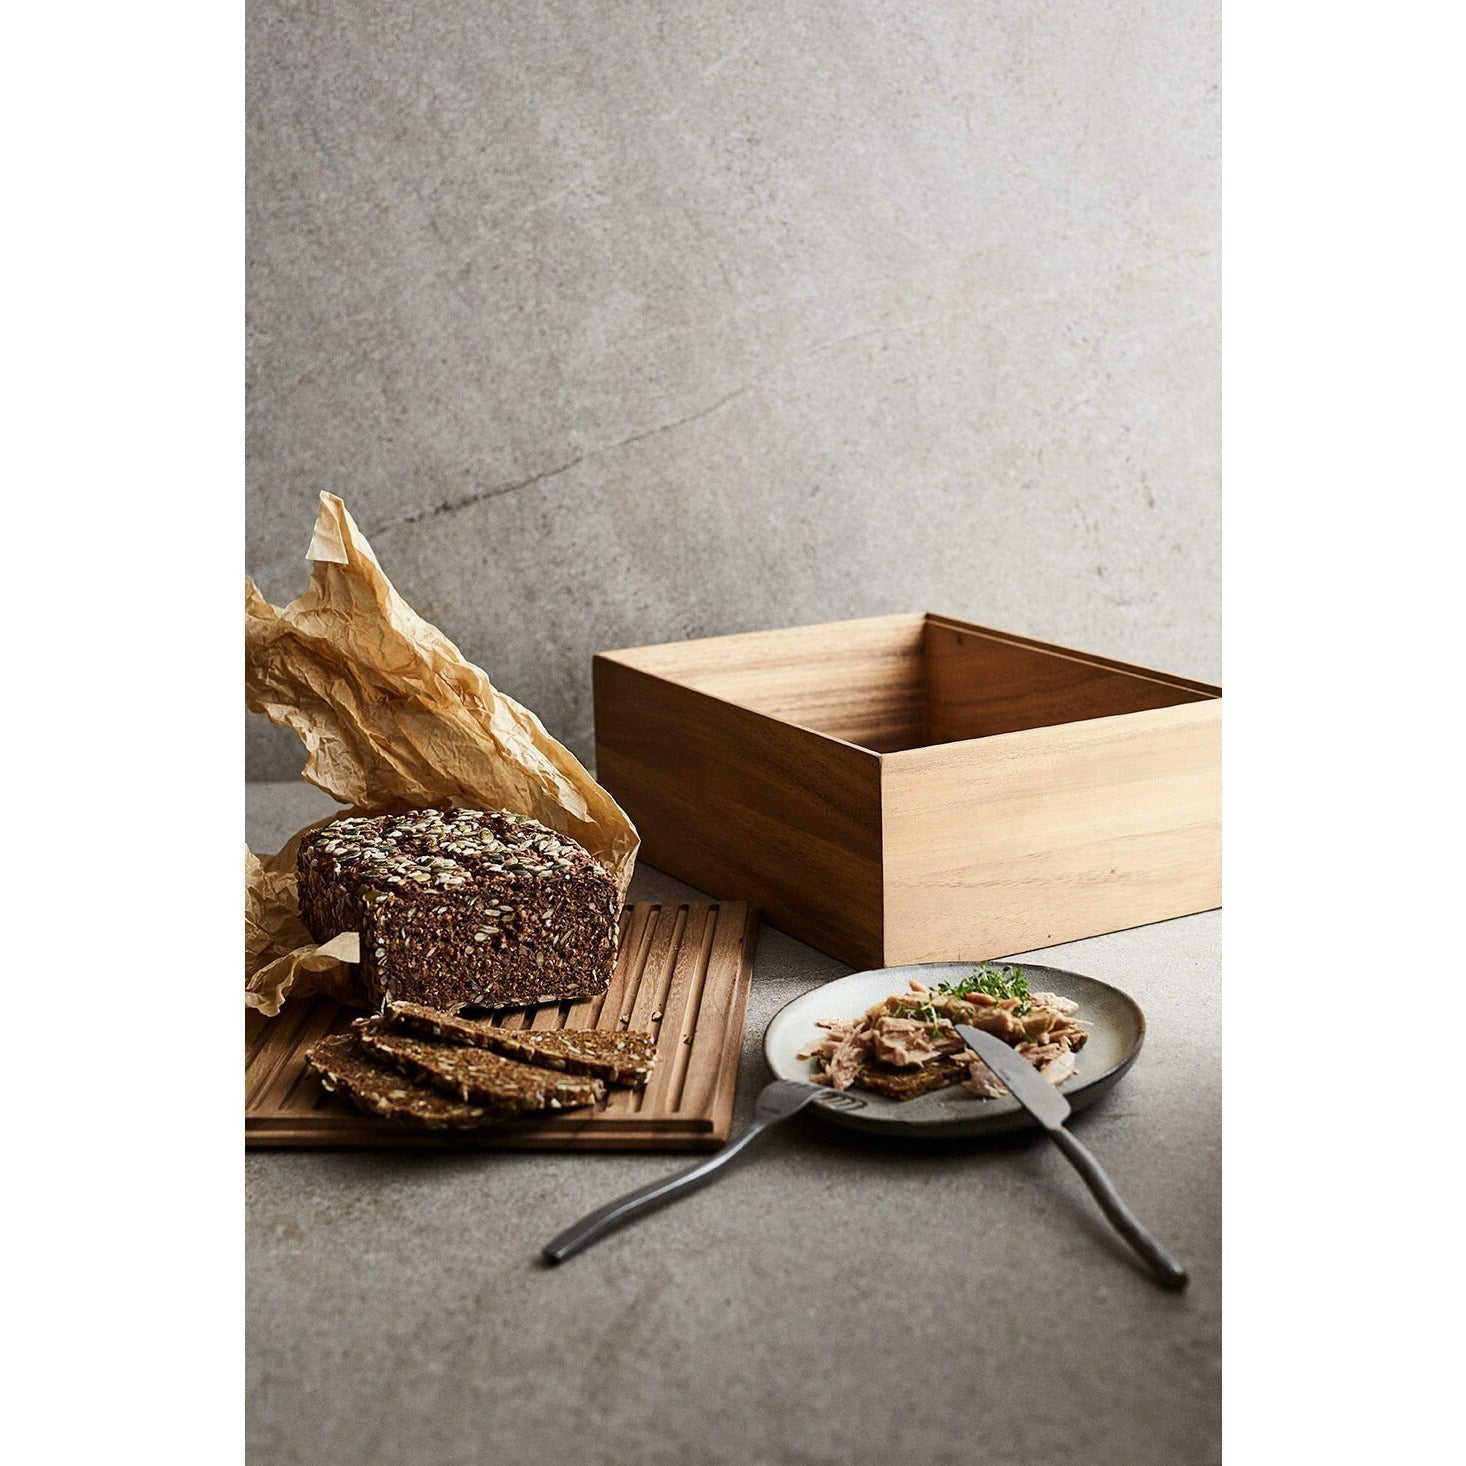 Muubs Mame cakebord oester, 17,4 cm